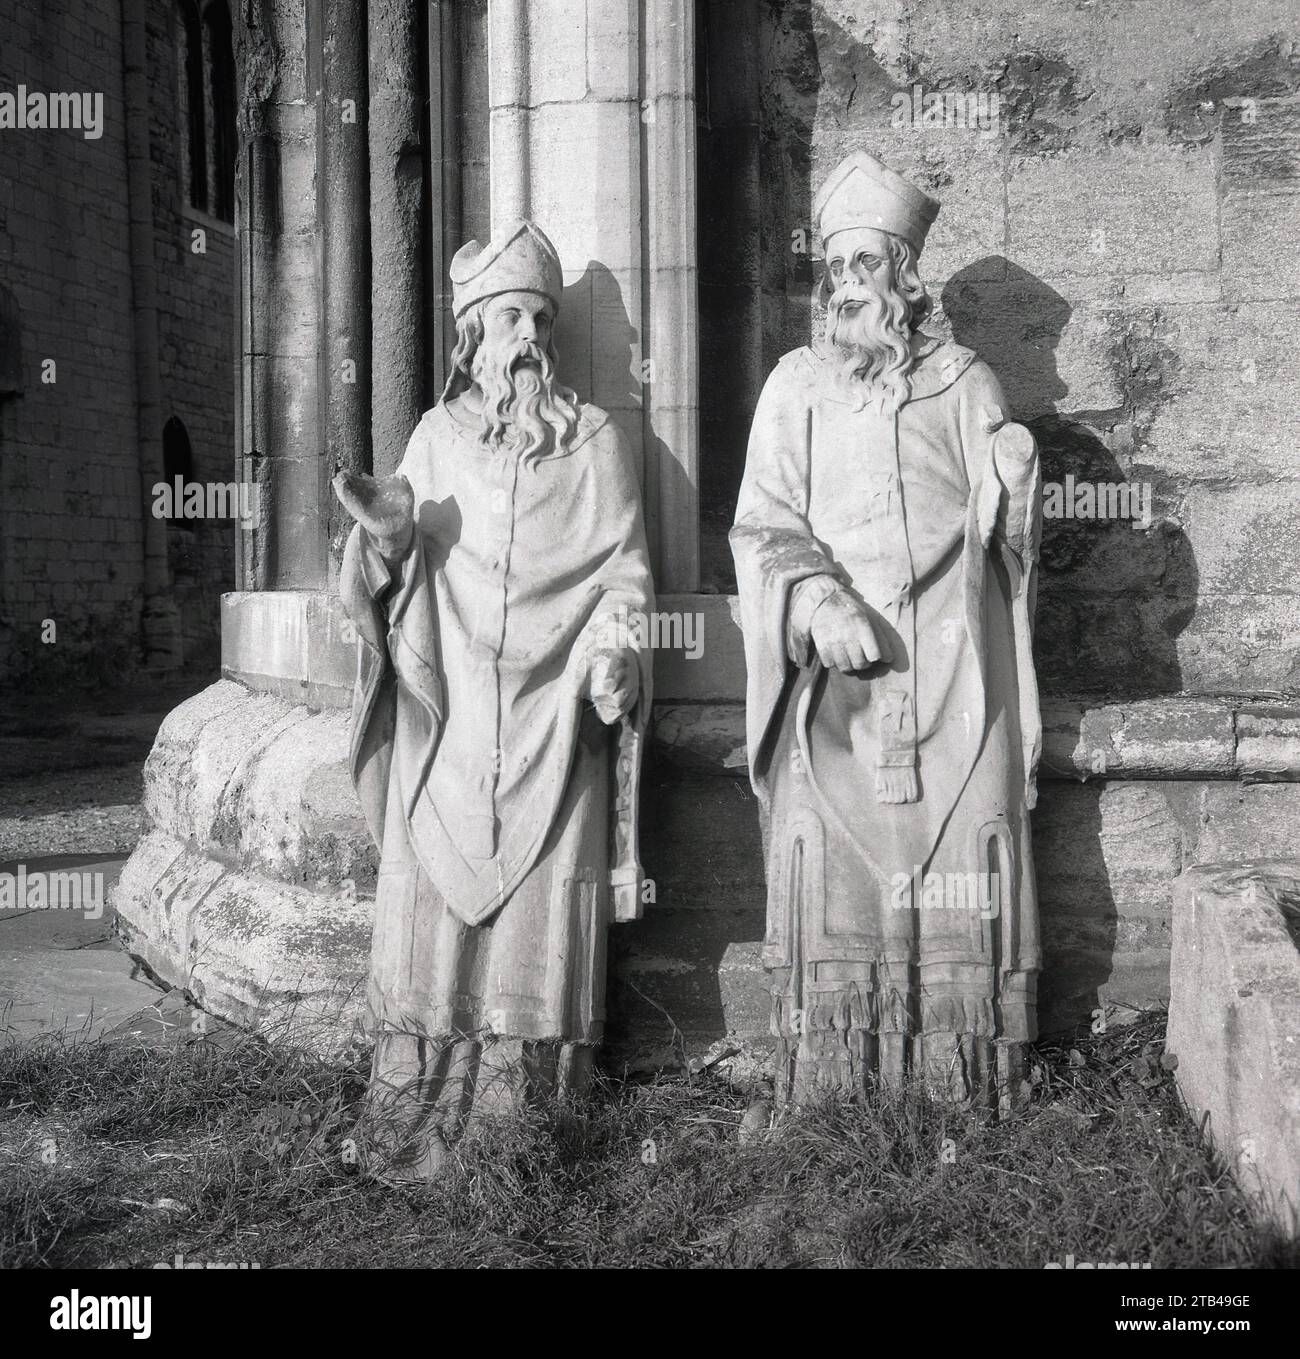 1960s, historical, two stone ecclesiastical bearded figures at the entrance to a church. Stock Photo